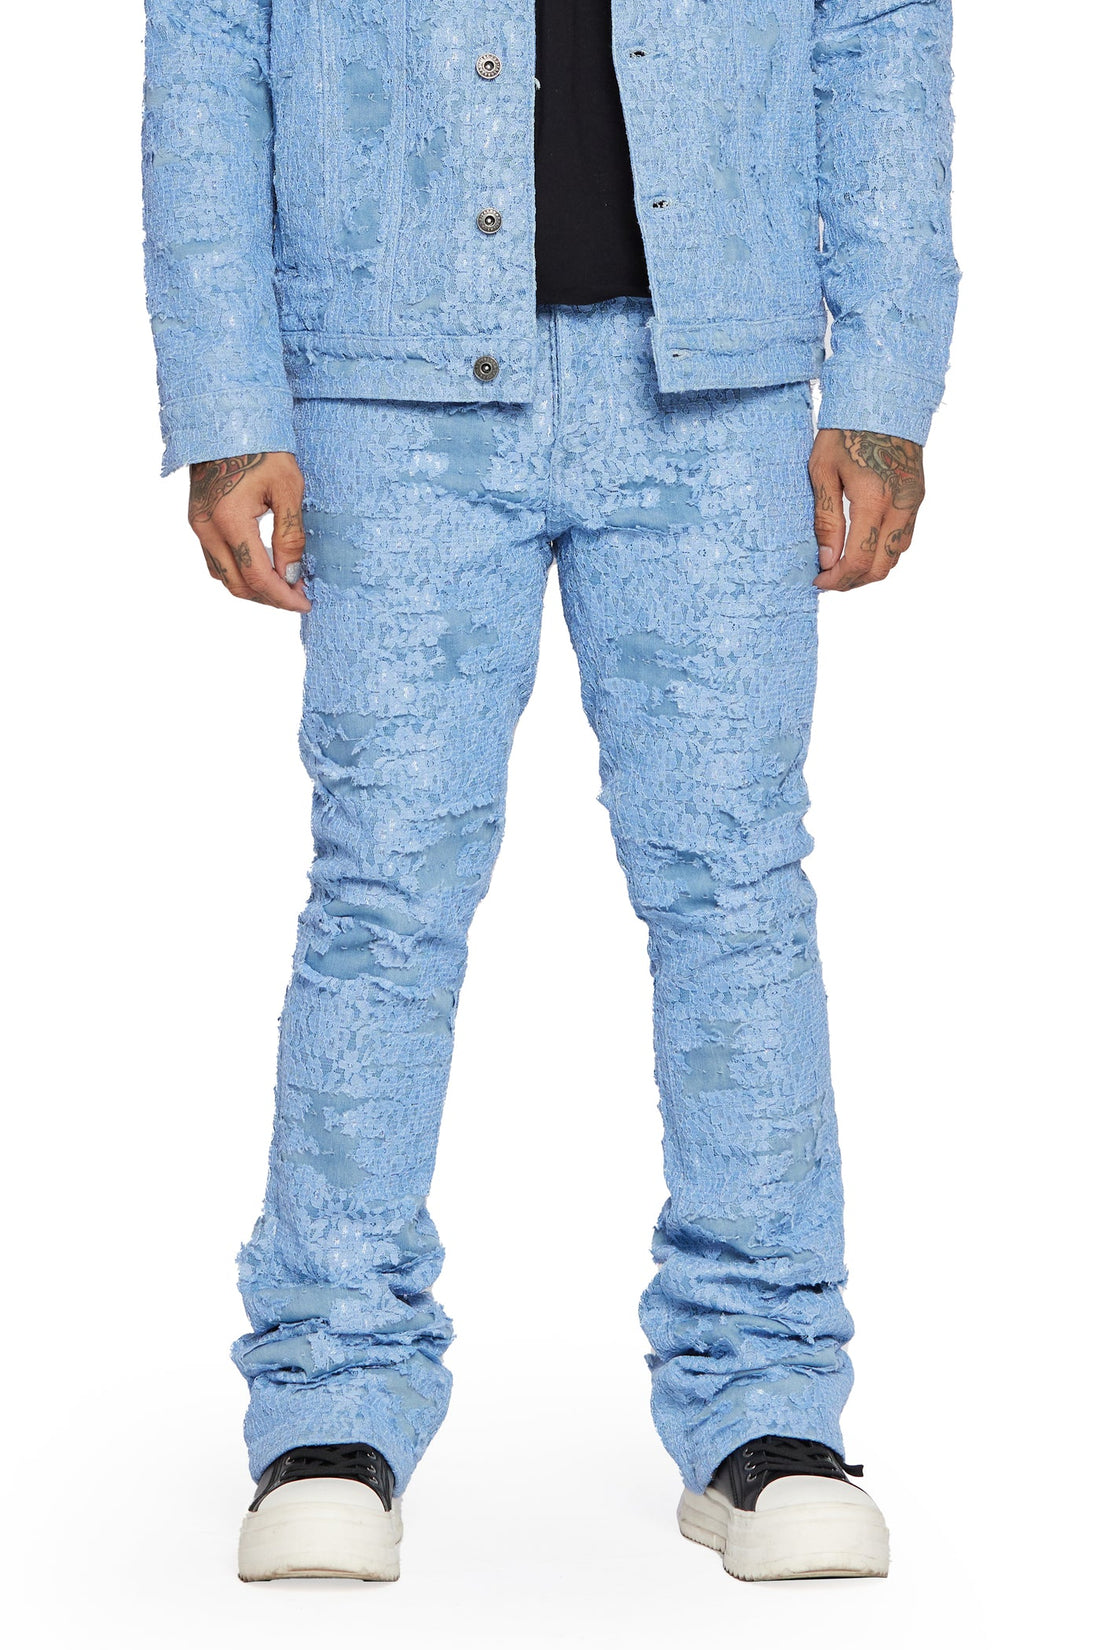 VALABASAS STACKED "BLUE MOON" LIGHT SKY Jeans